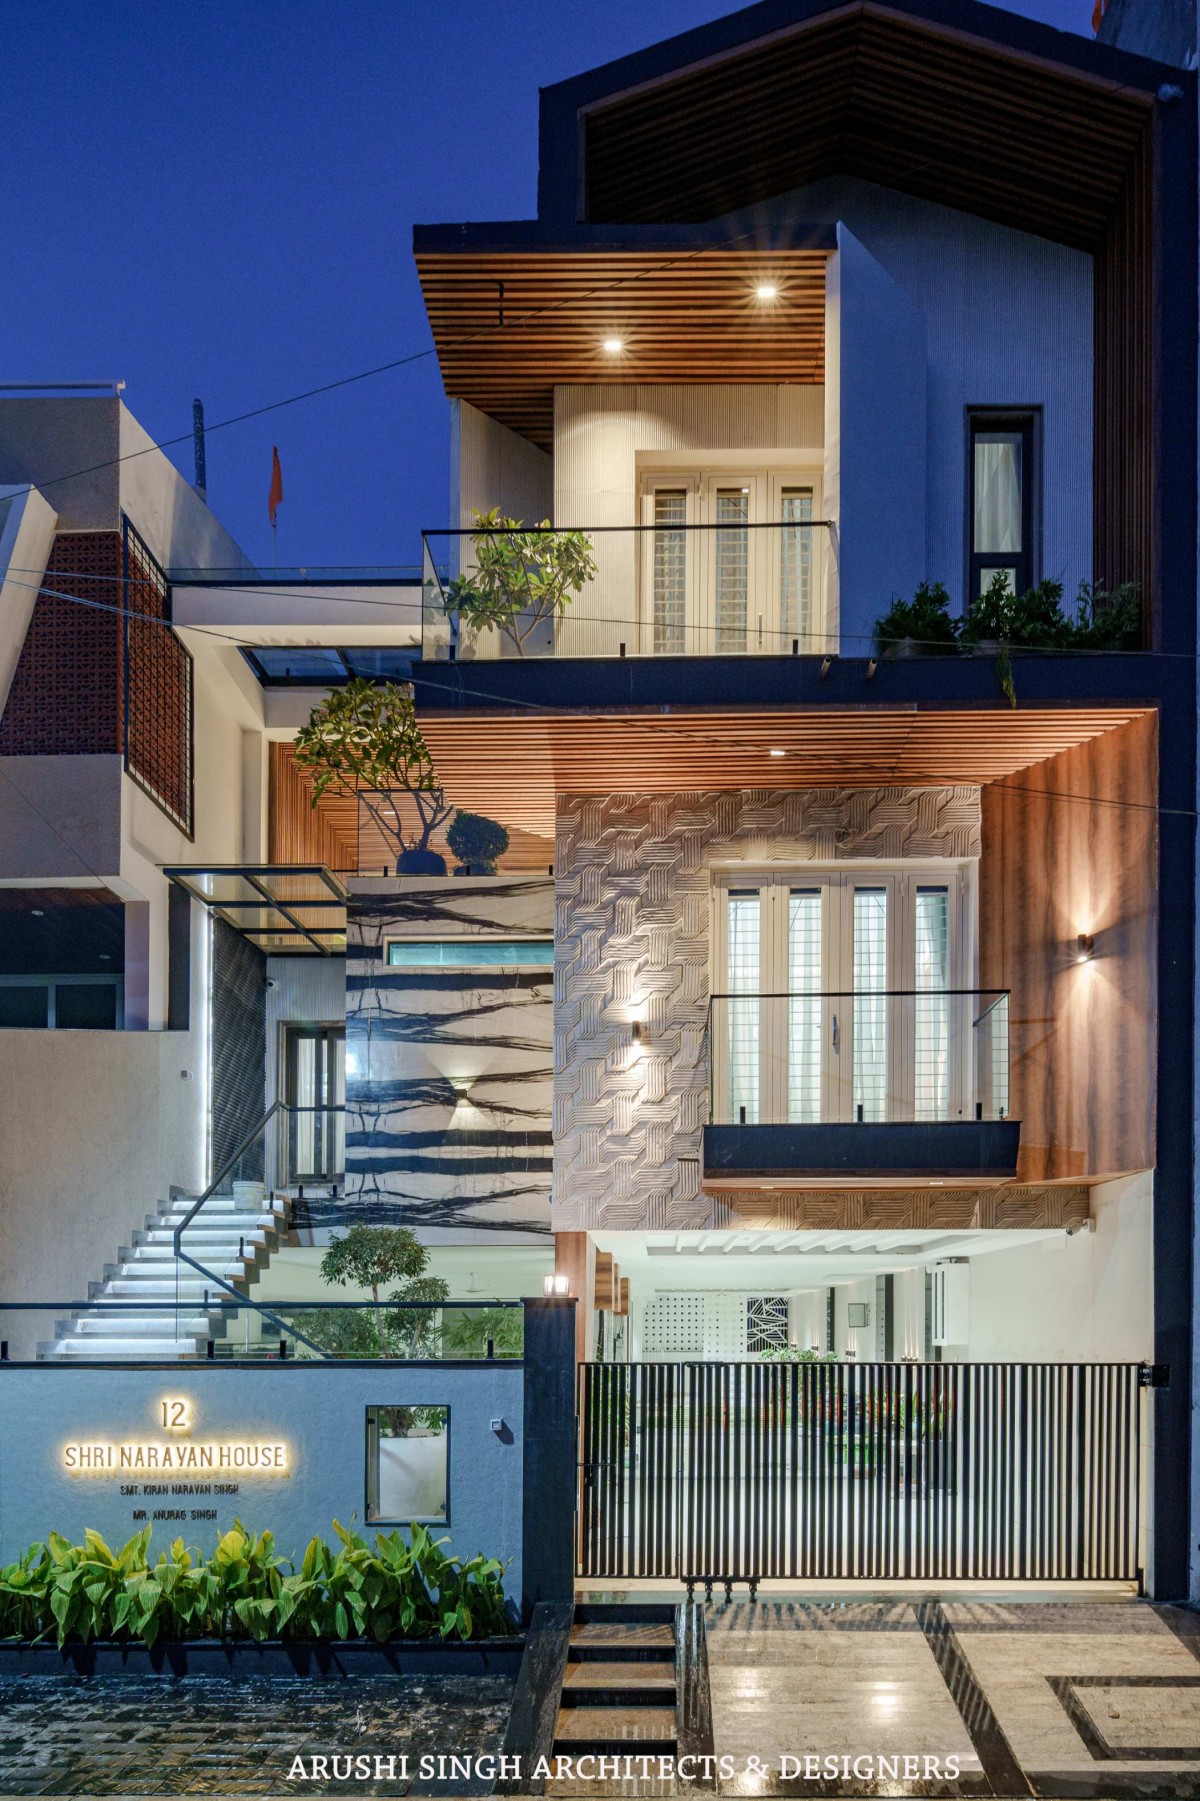 Exterior view of The Narayan House by Arushi Singh Architects & Designers